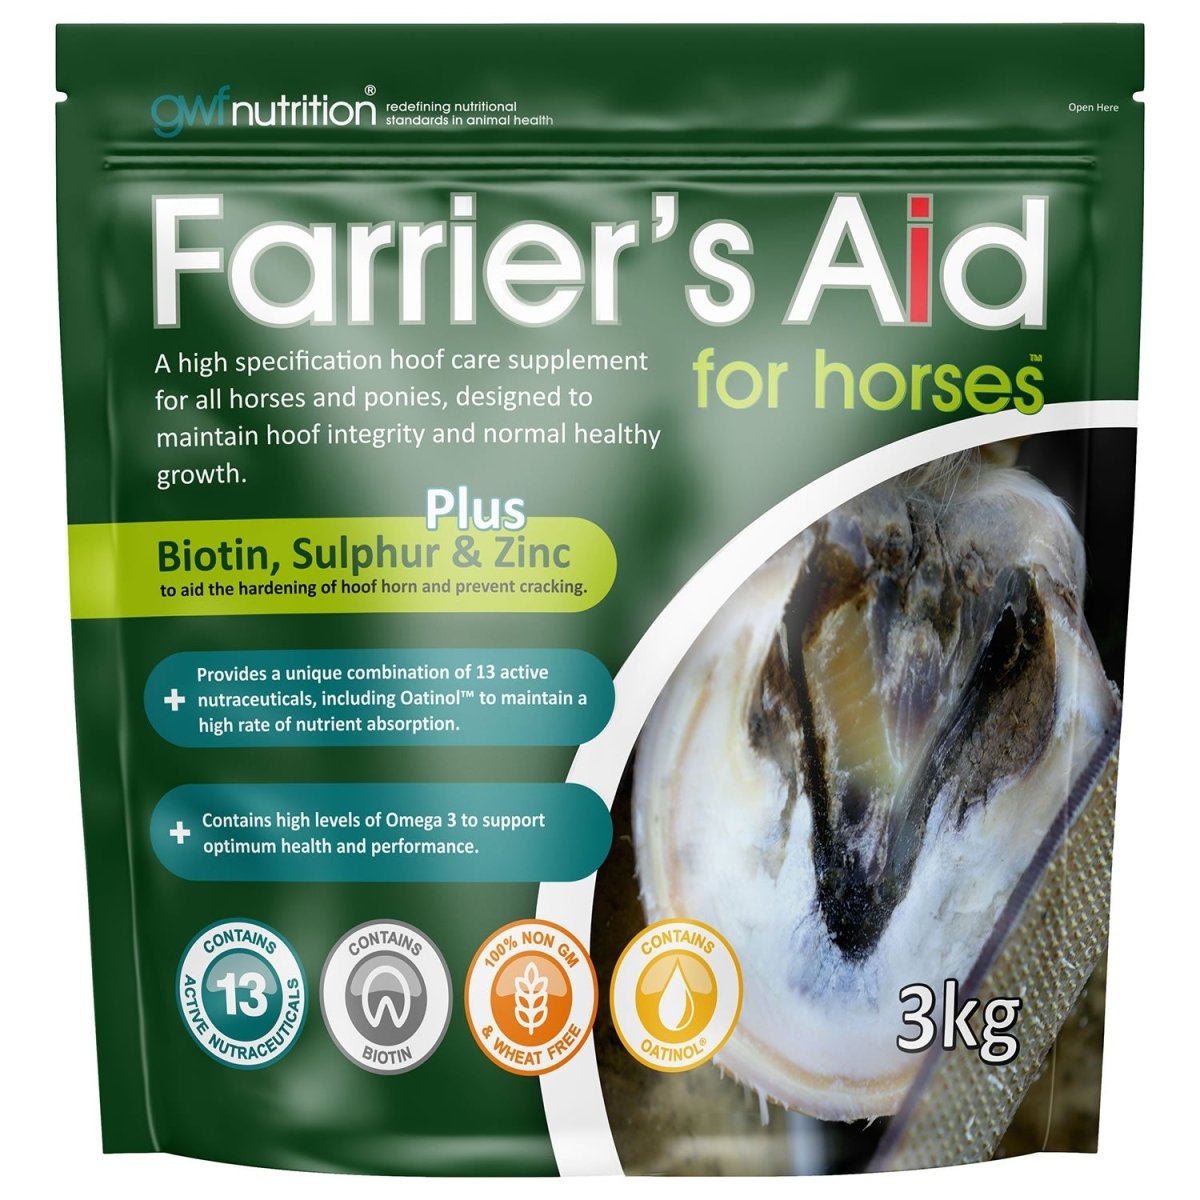 Gwf Farriers Aid For Horses - 3Kg -